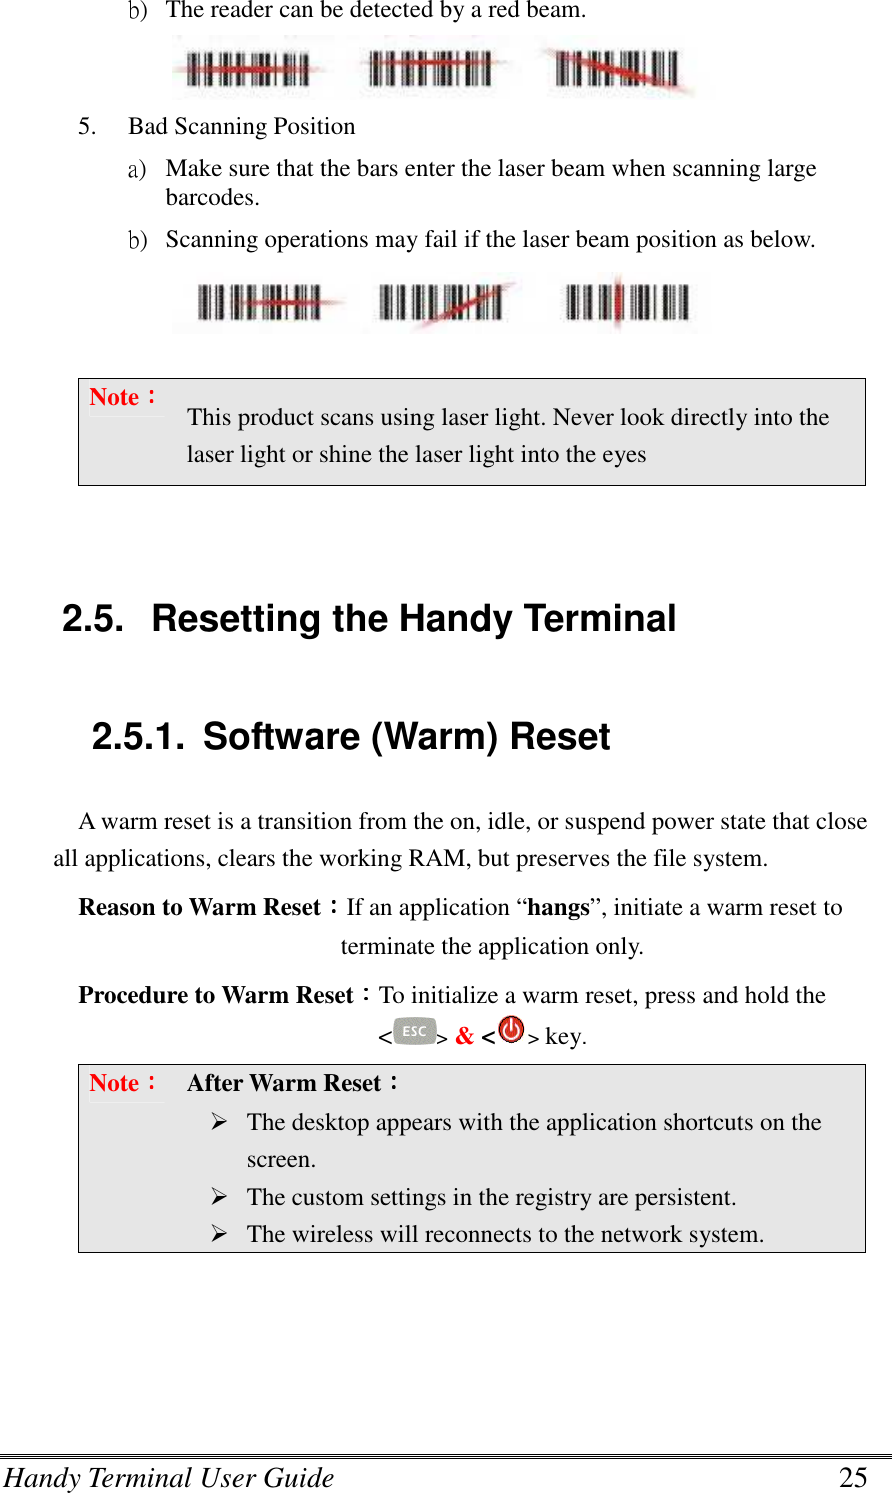 Handy Terminal User Guide      25 b) The reader can be detected by a red beam.  5. Bad Scanning Position a) Make sure that the bars enter the laser beam when scanning large barcodes. b) Scanning operations may fail if the laser beam position as below.   Note：：：： This product scans using laser light. Never look directly into the laser light or shine the laser light into the eyes   2.5.  Resetting the Handy Terminal  2.5.1.  Software (Warm) Reset A warm reset is a transition from the on, idle, or suspend power state that close all applications, clears the working RAM, but preserves the file system. Reason to Warm Reset：：：：If an application “hangs”, initiate a warm reset to terminate the application only. Procedure to Warm Reset：：：：To initialize a warm reset, press and hold the &lt;&gt; &amp; &lt;&gt; key. Note：：：： After Warm Reset：：：：     The desktop appears with the application shortcuts on the screen.  The custom settings in the registry are persistent.  The wireless will reconnects to the network system.    